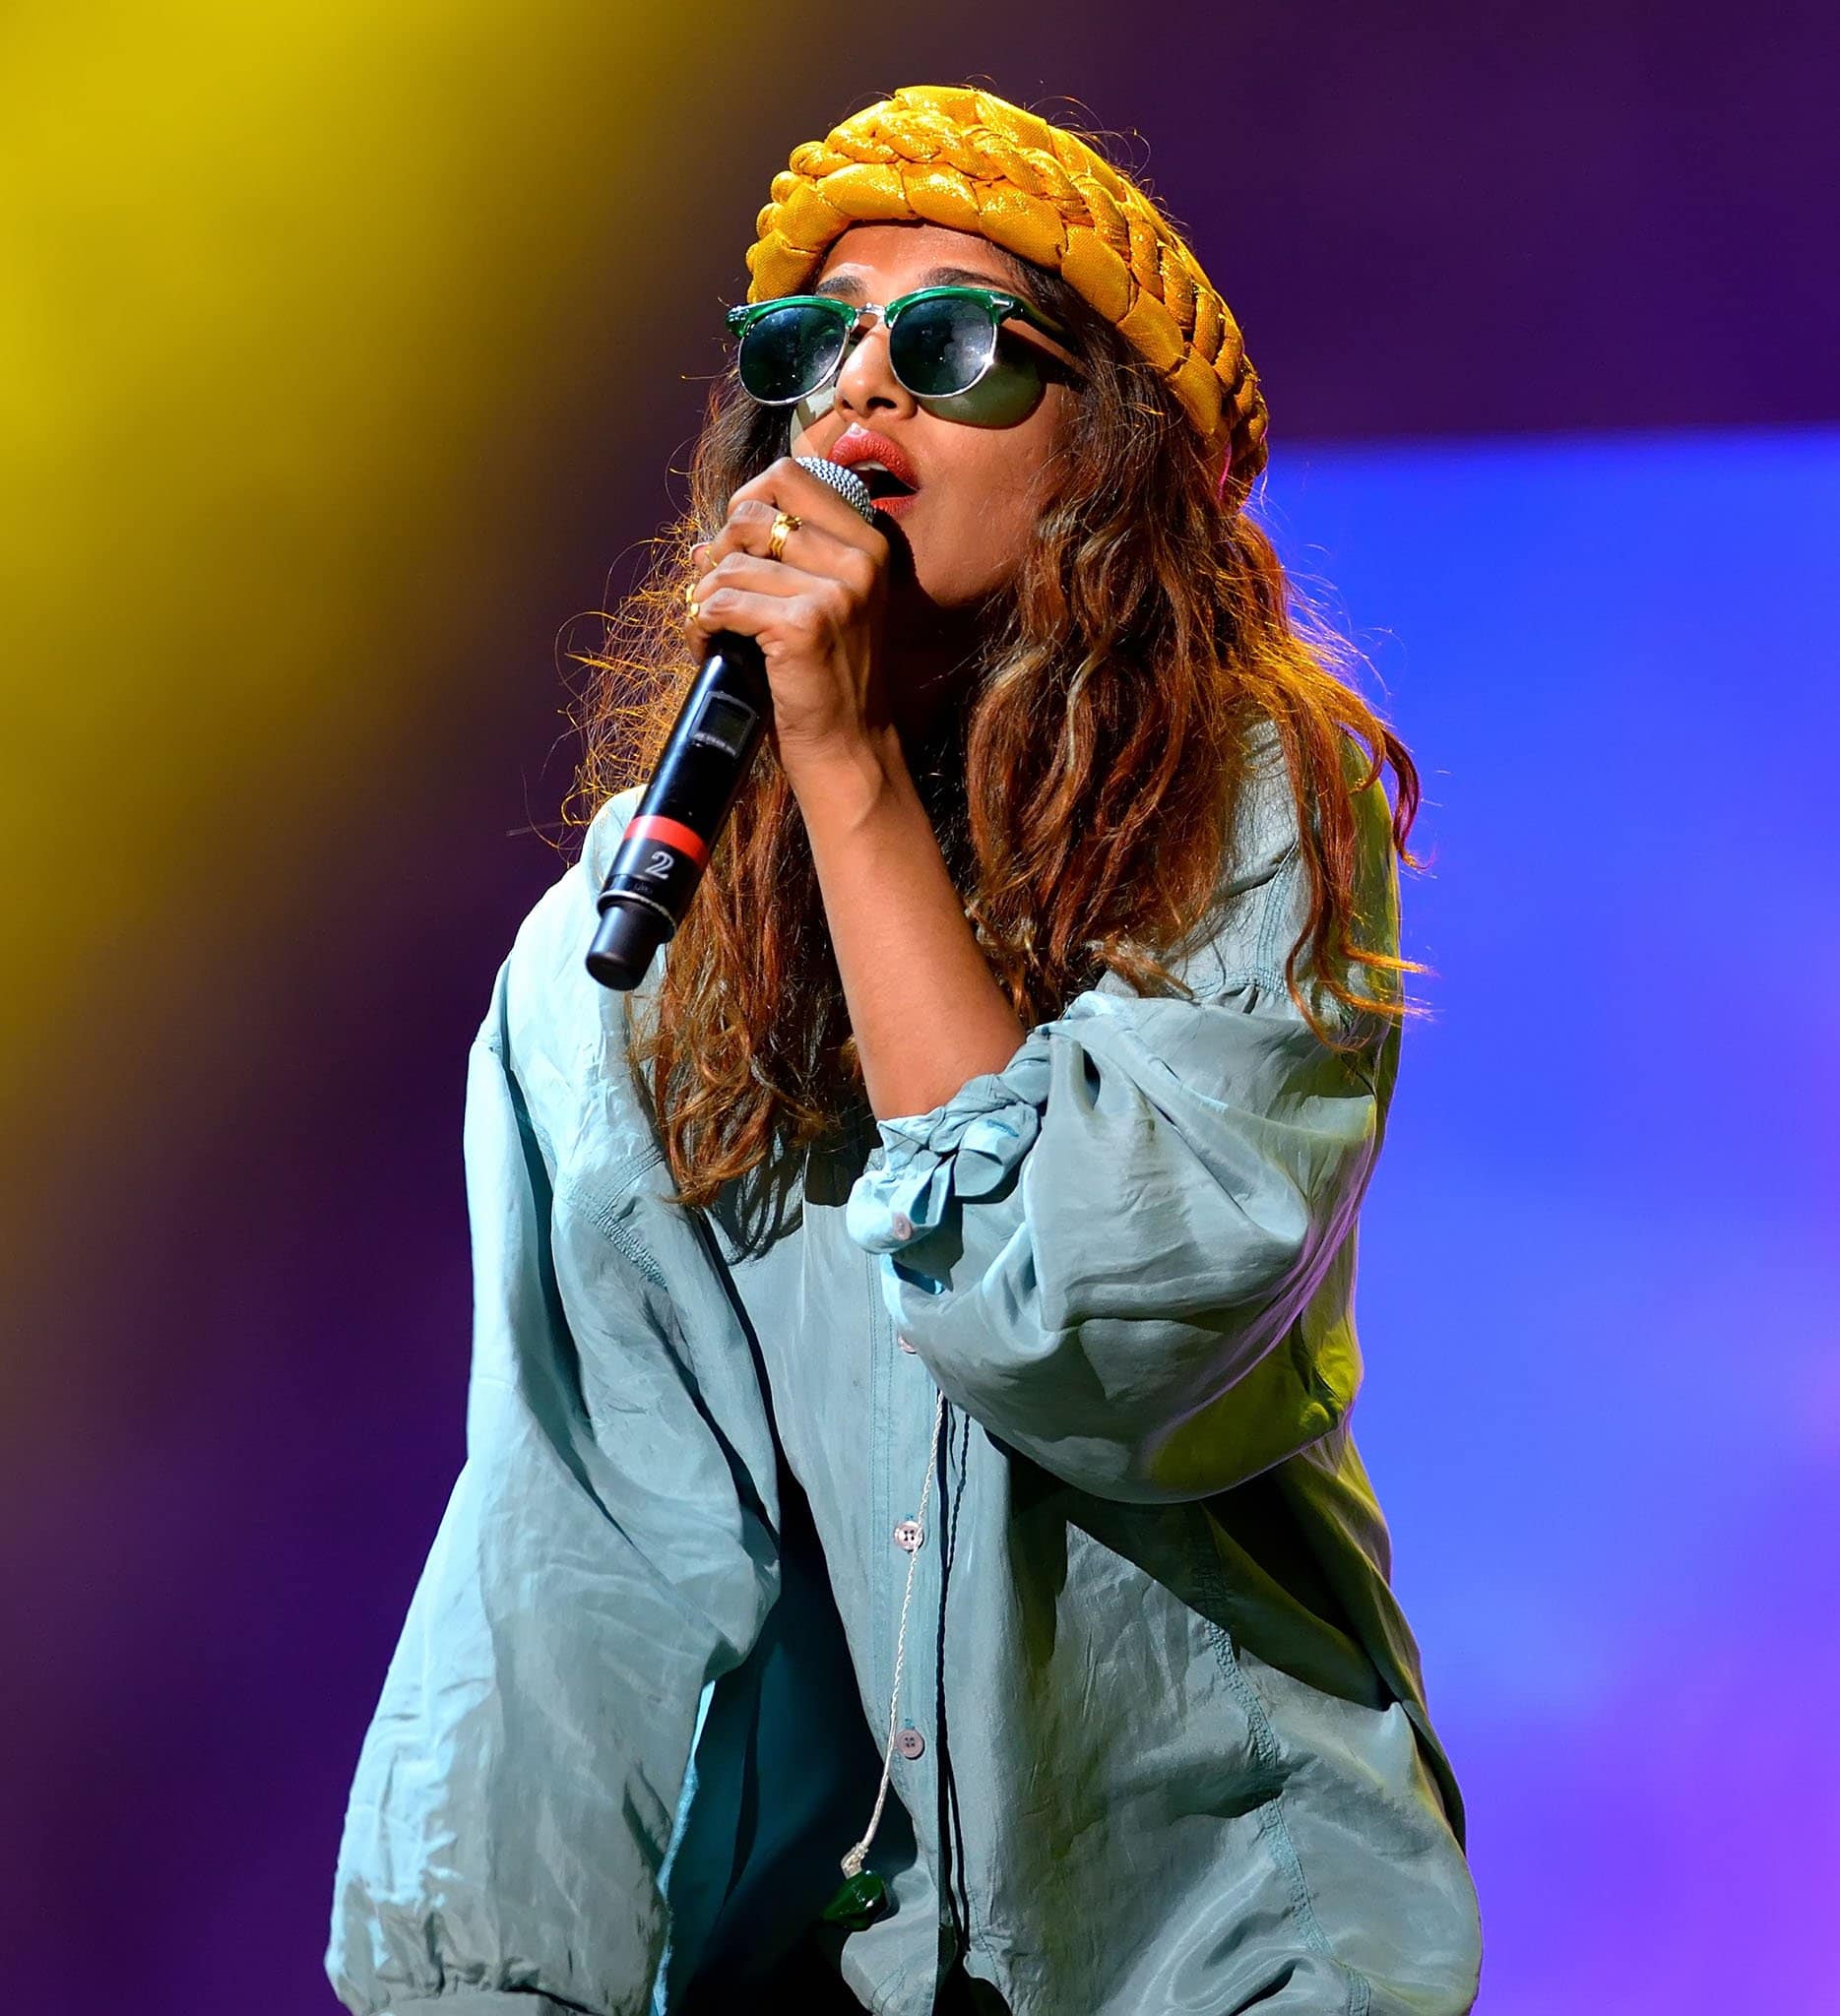 M.I.A. initially began her artistic journey as a visual artist and filmmaker, and later ventured into music by composing and recording a six-song demo tape in 2003, marking the beginning of her successful career as a musician